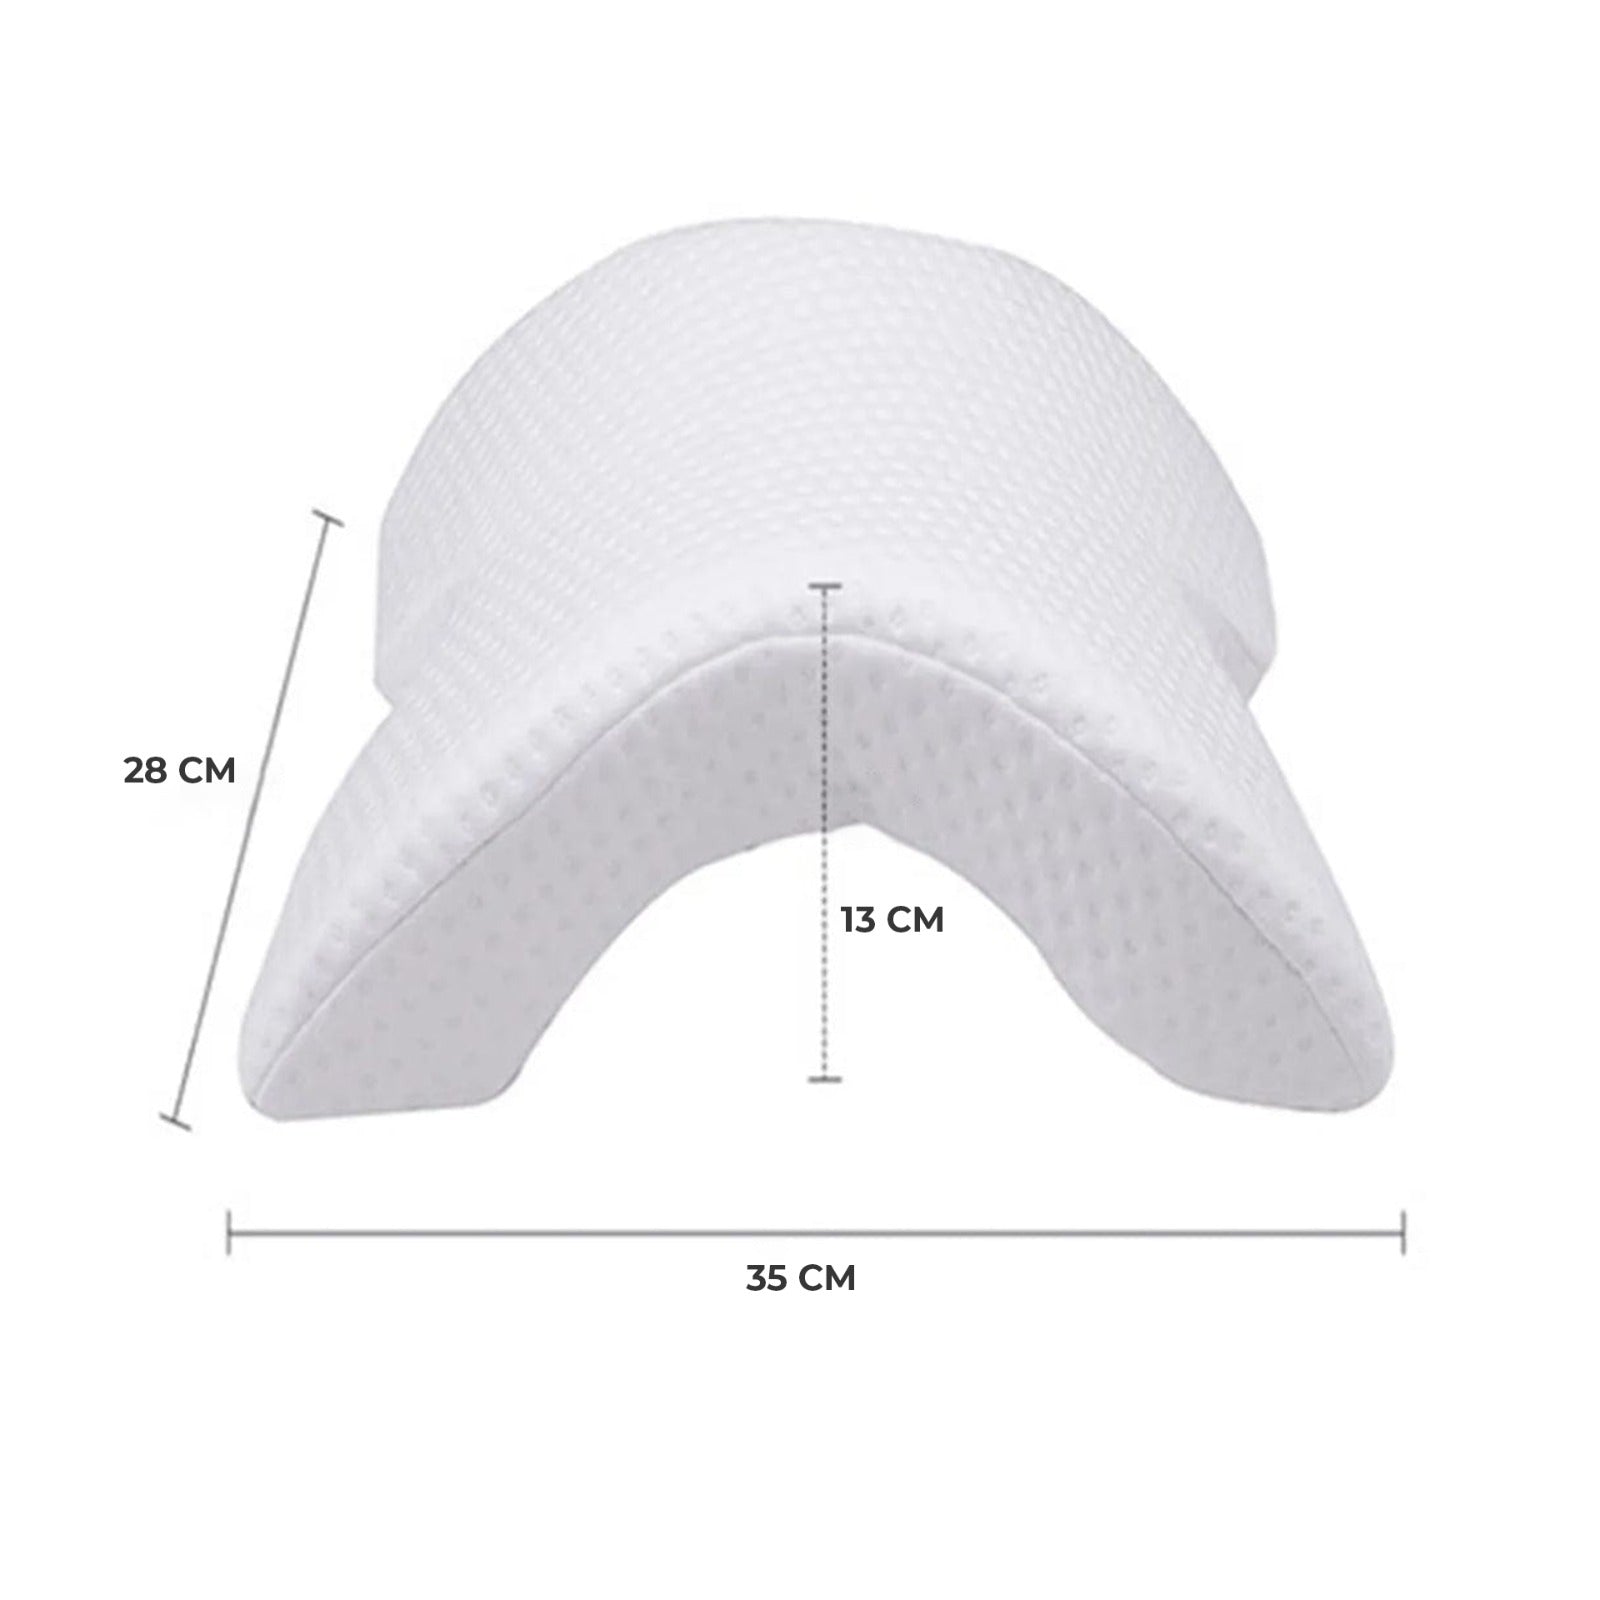 U-Shaped Curved Memory Foam Sleeping Neck Cervical Pillow with Hollow Design Arm Rest